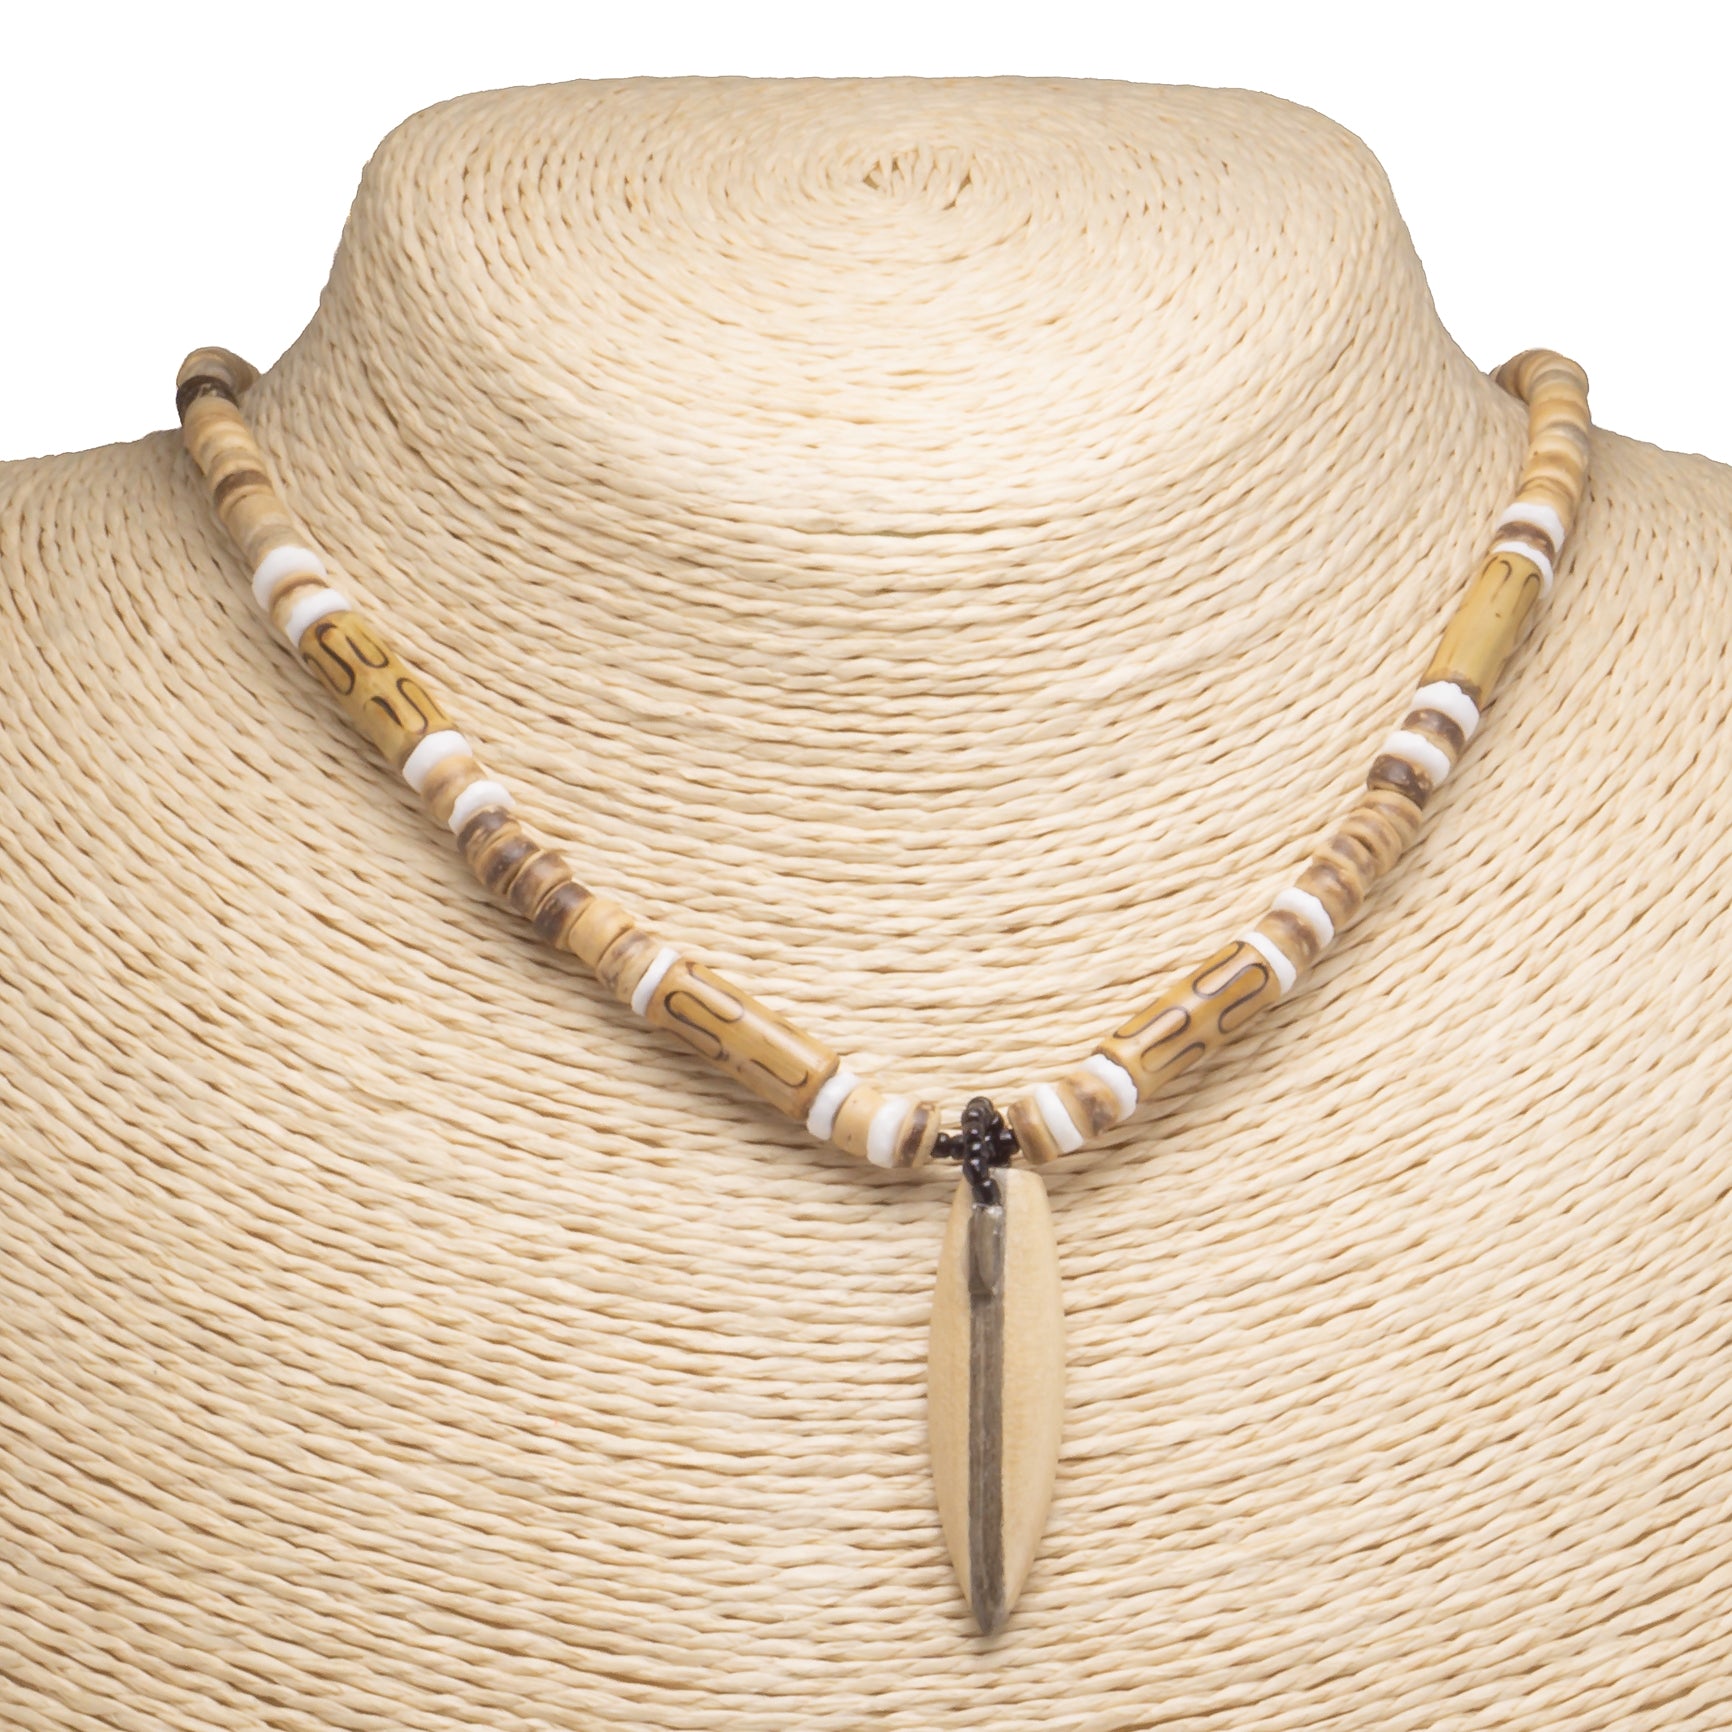 Wood Surfboard Pendant on Tiger Coconut Beads Necklace